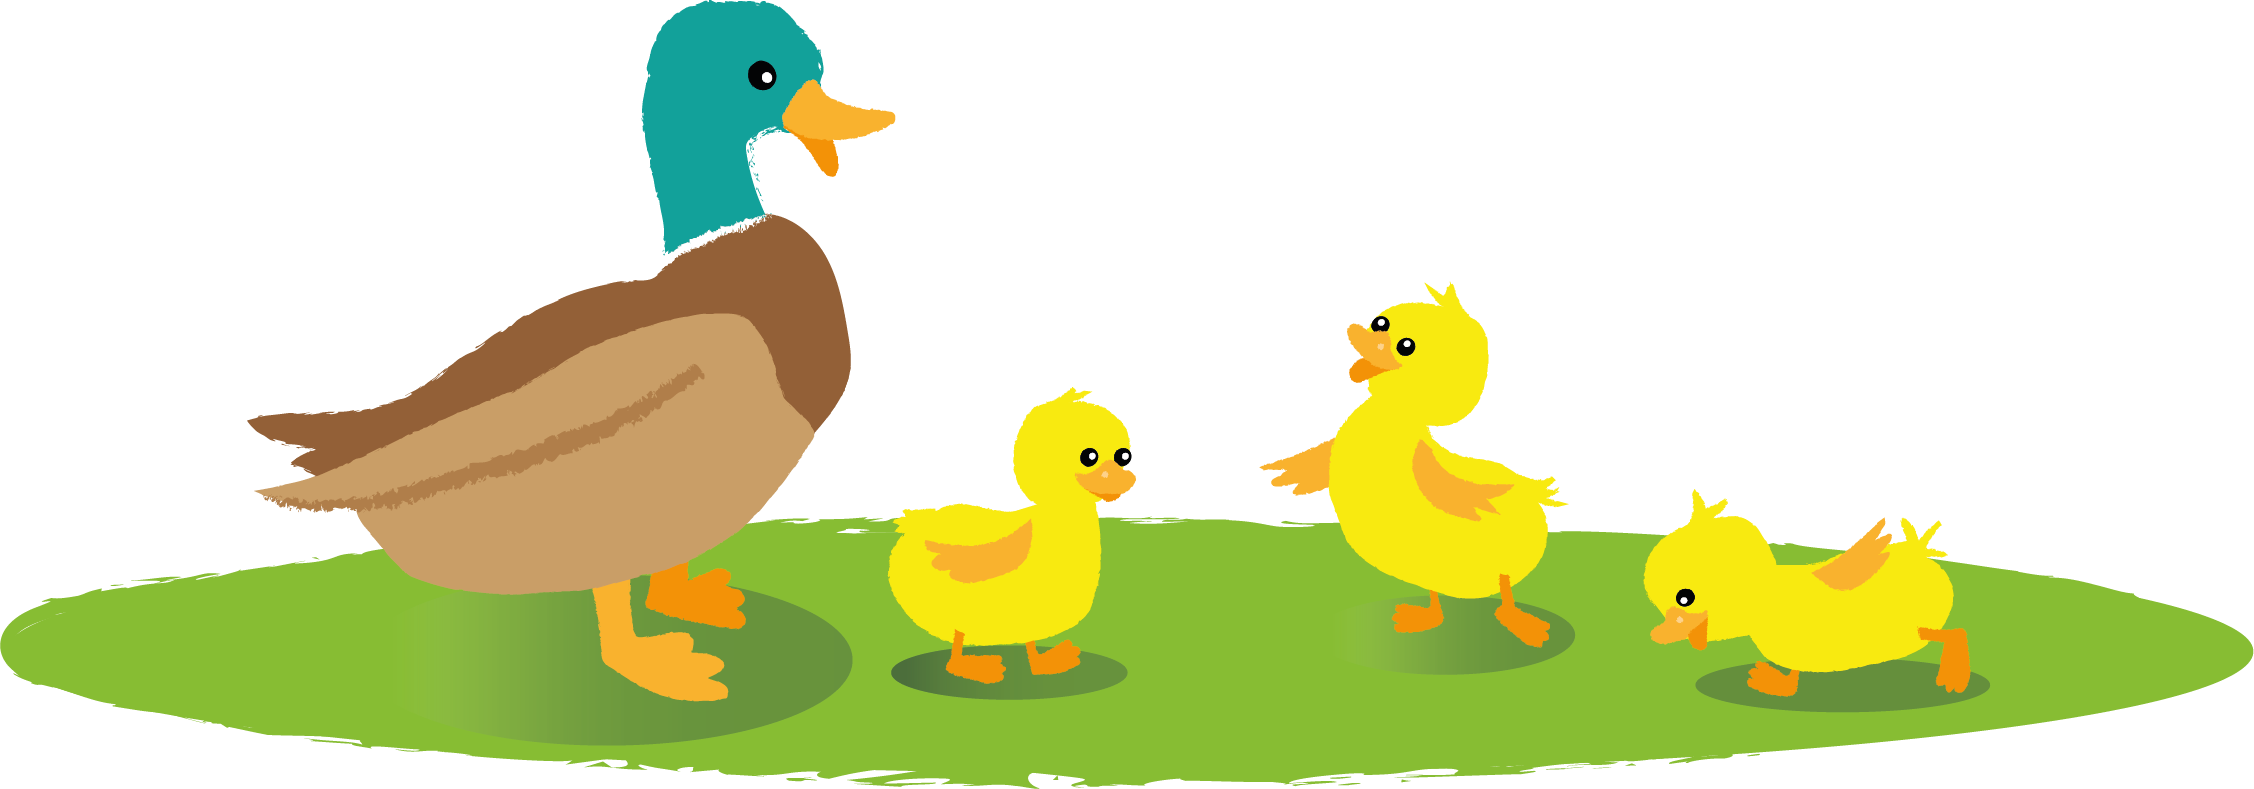 A illustrated image of three ducklings next to a mother duck on grass.